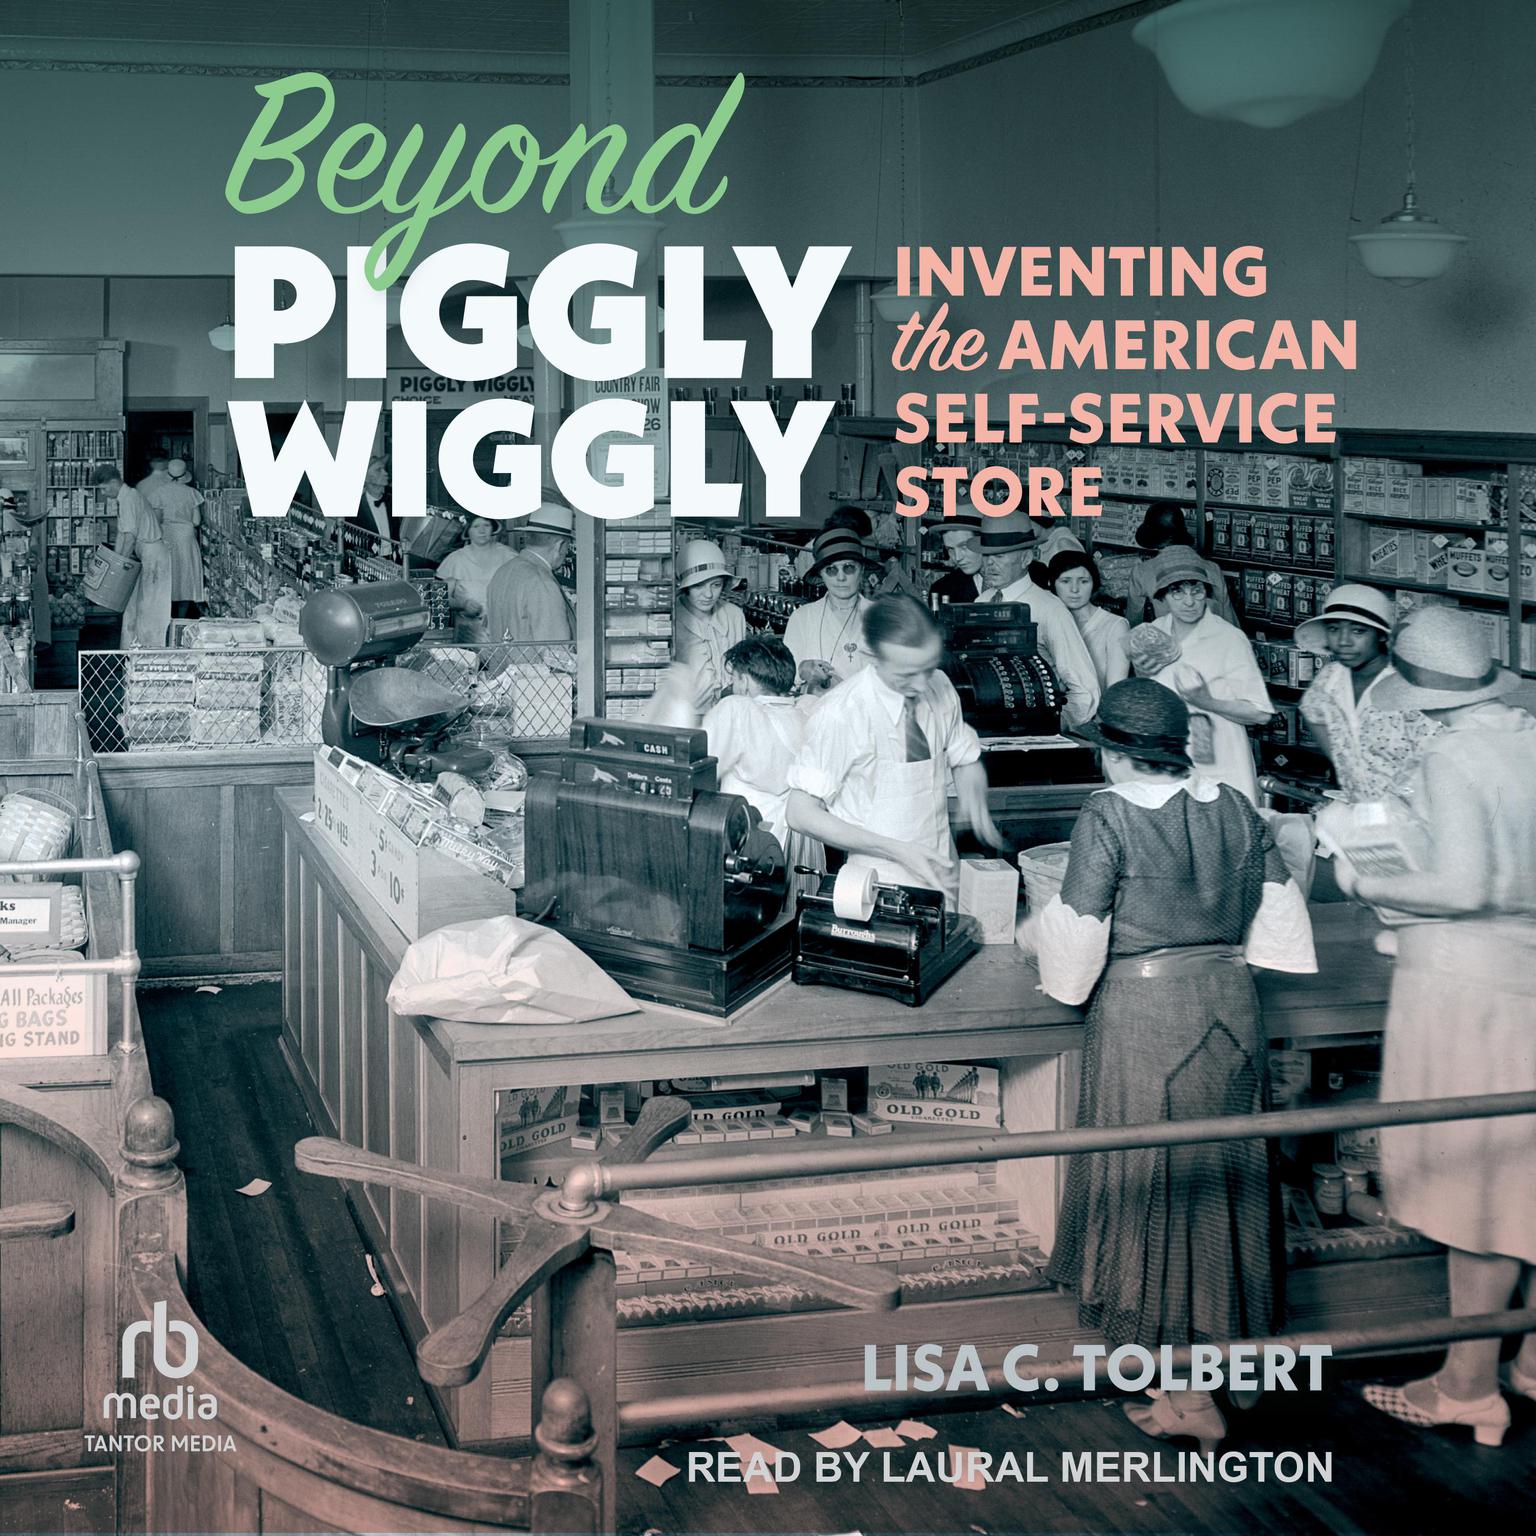 Beyond Piggly Wiggly: Inventing the American Self-Service Store Audiobook, by Lisa C. Tolbert